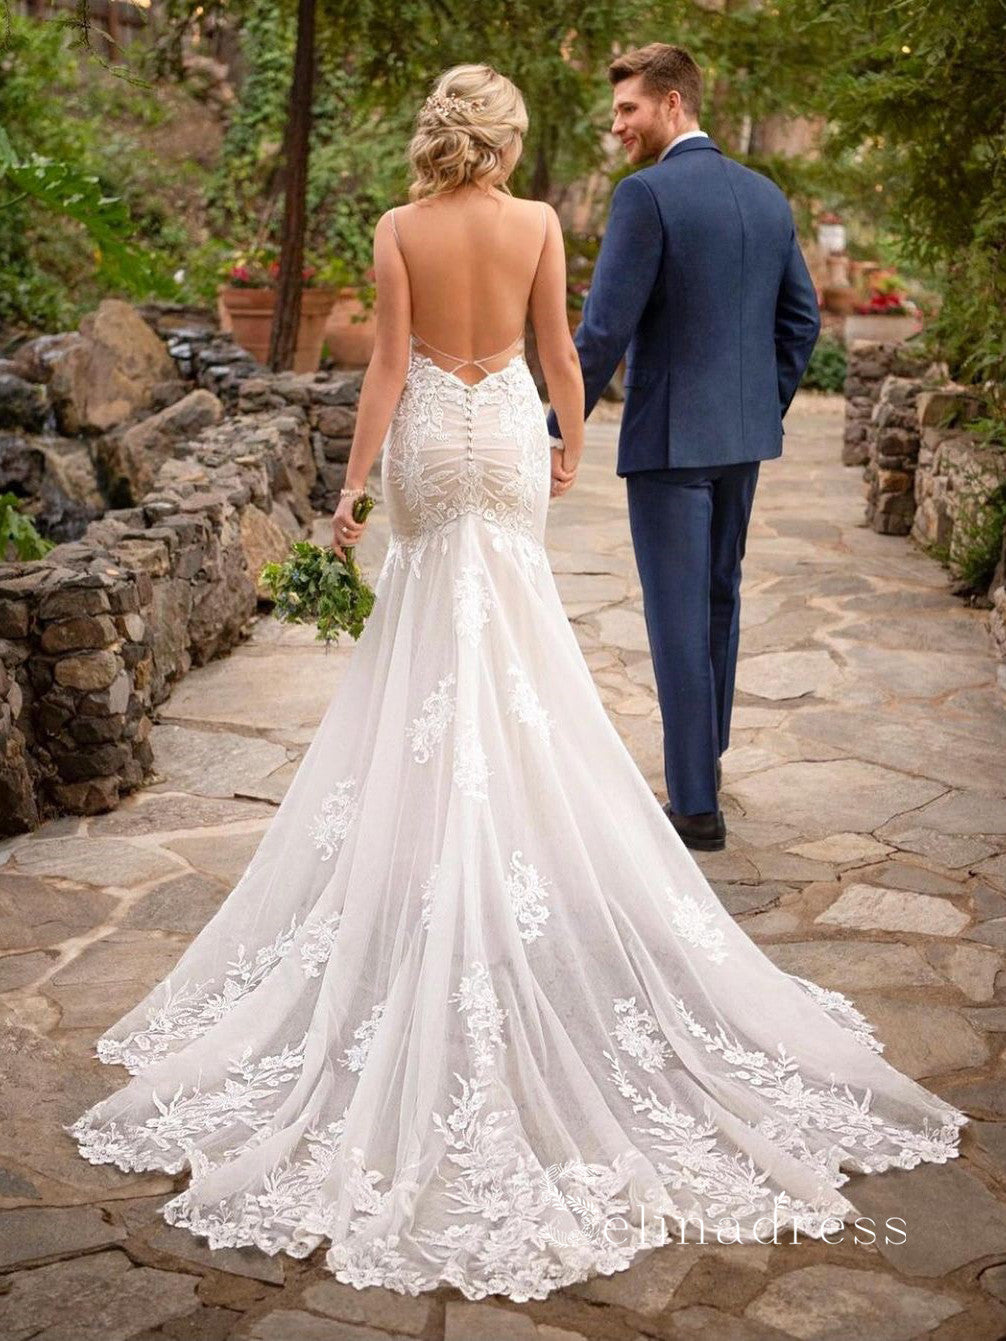 15 Beautiful Backless Wedding Dresses & Gowns You Need to See!